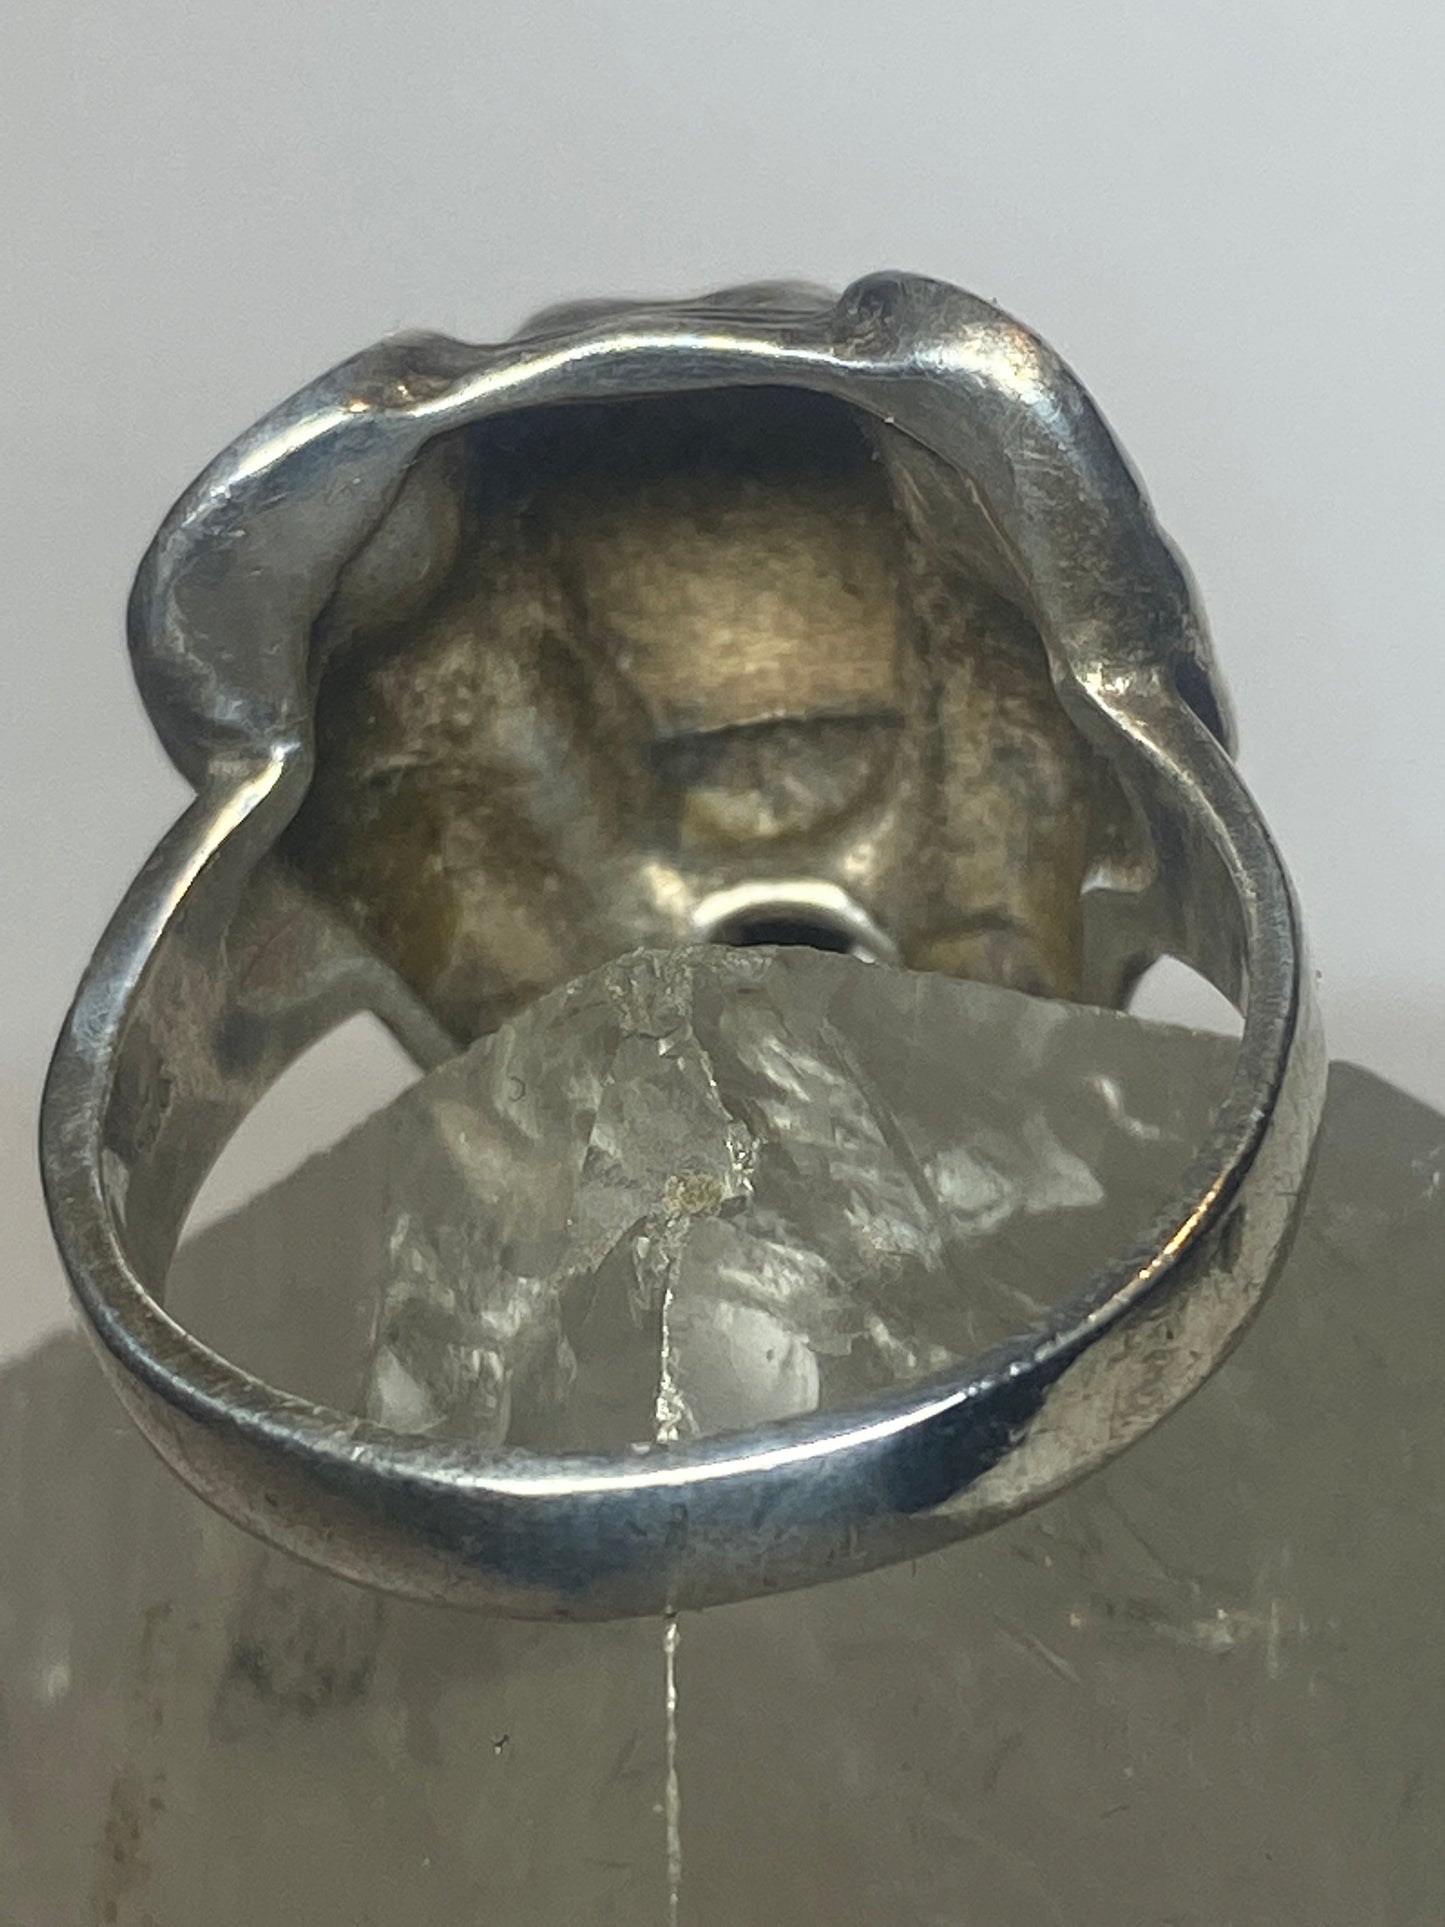 Elephant ring face band sterling silver women girls